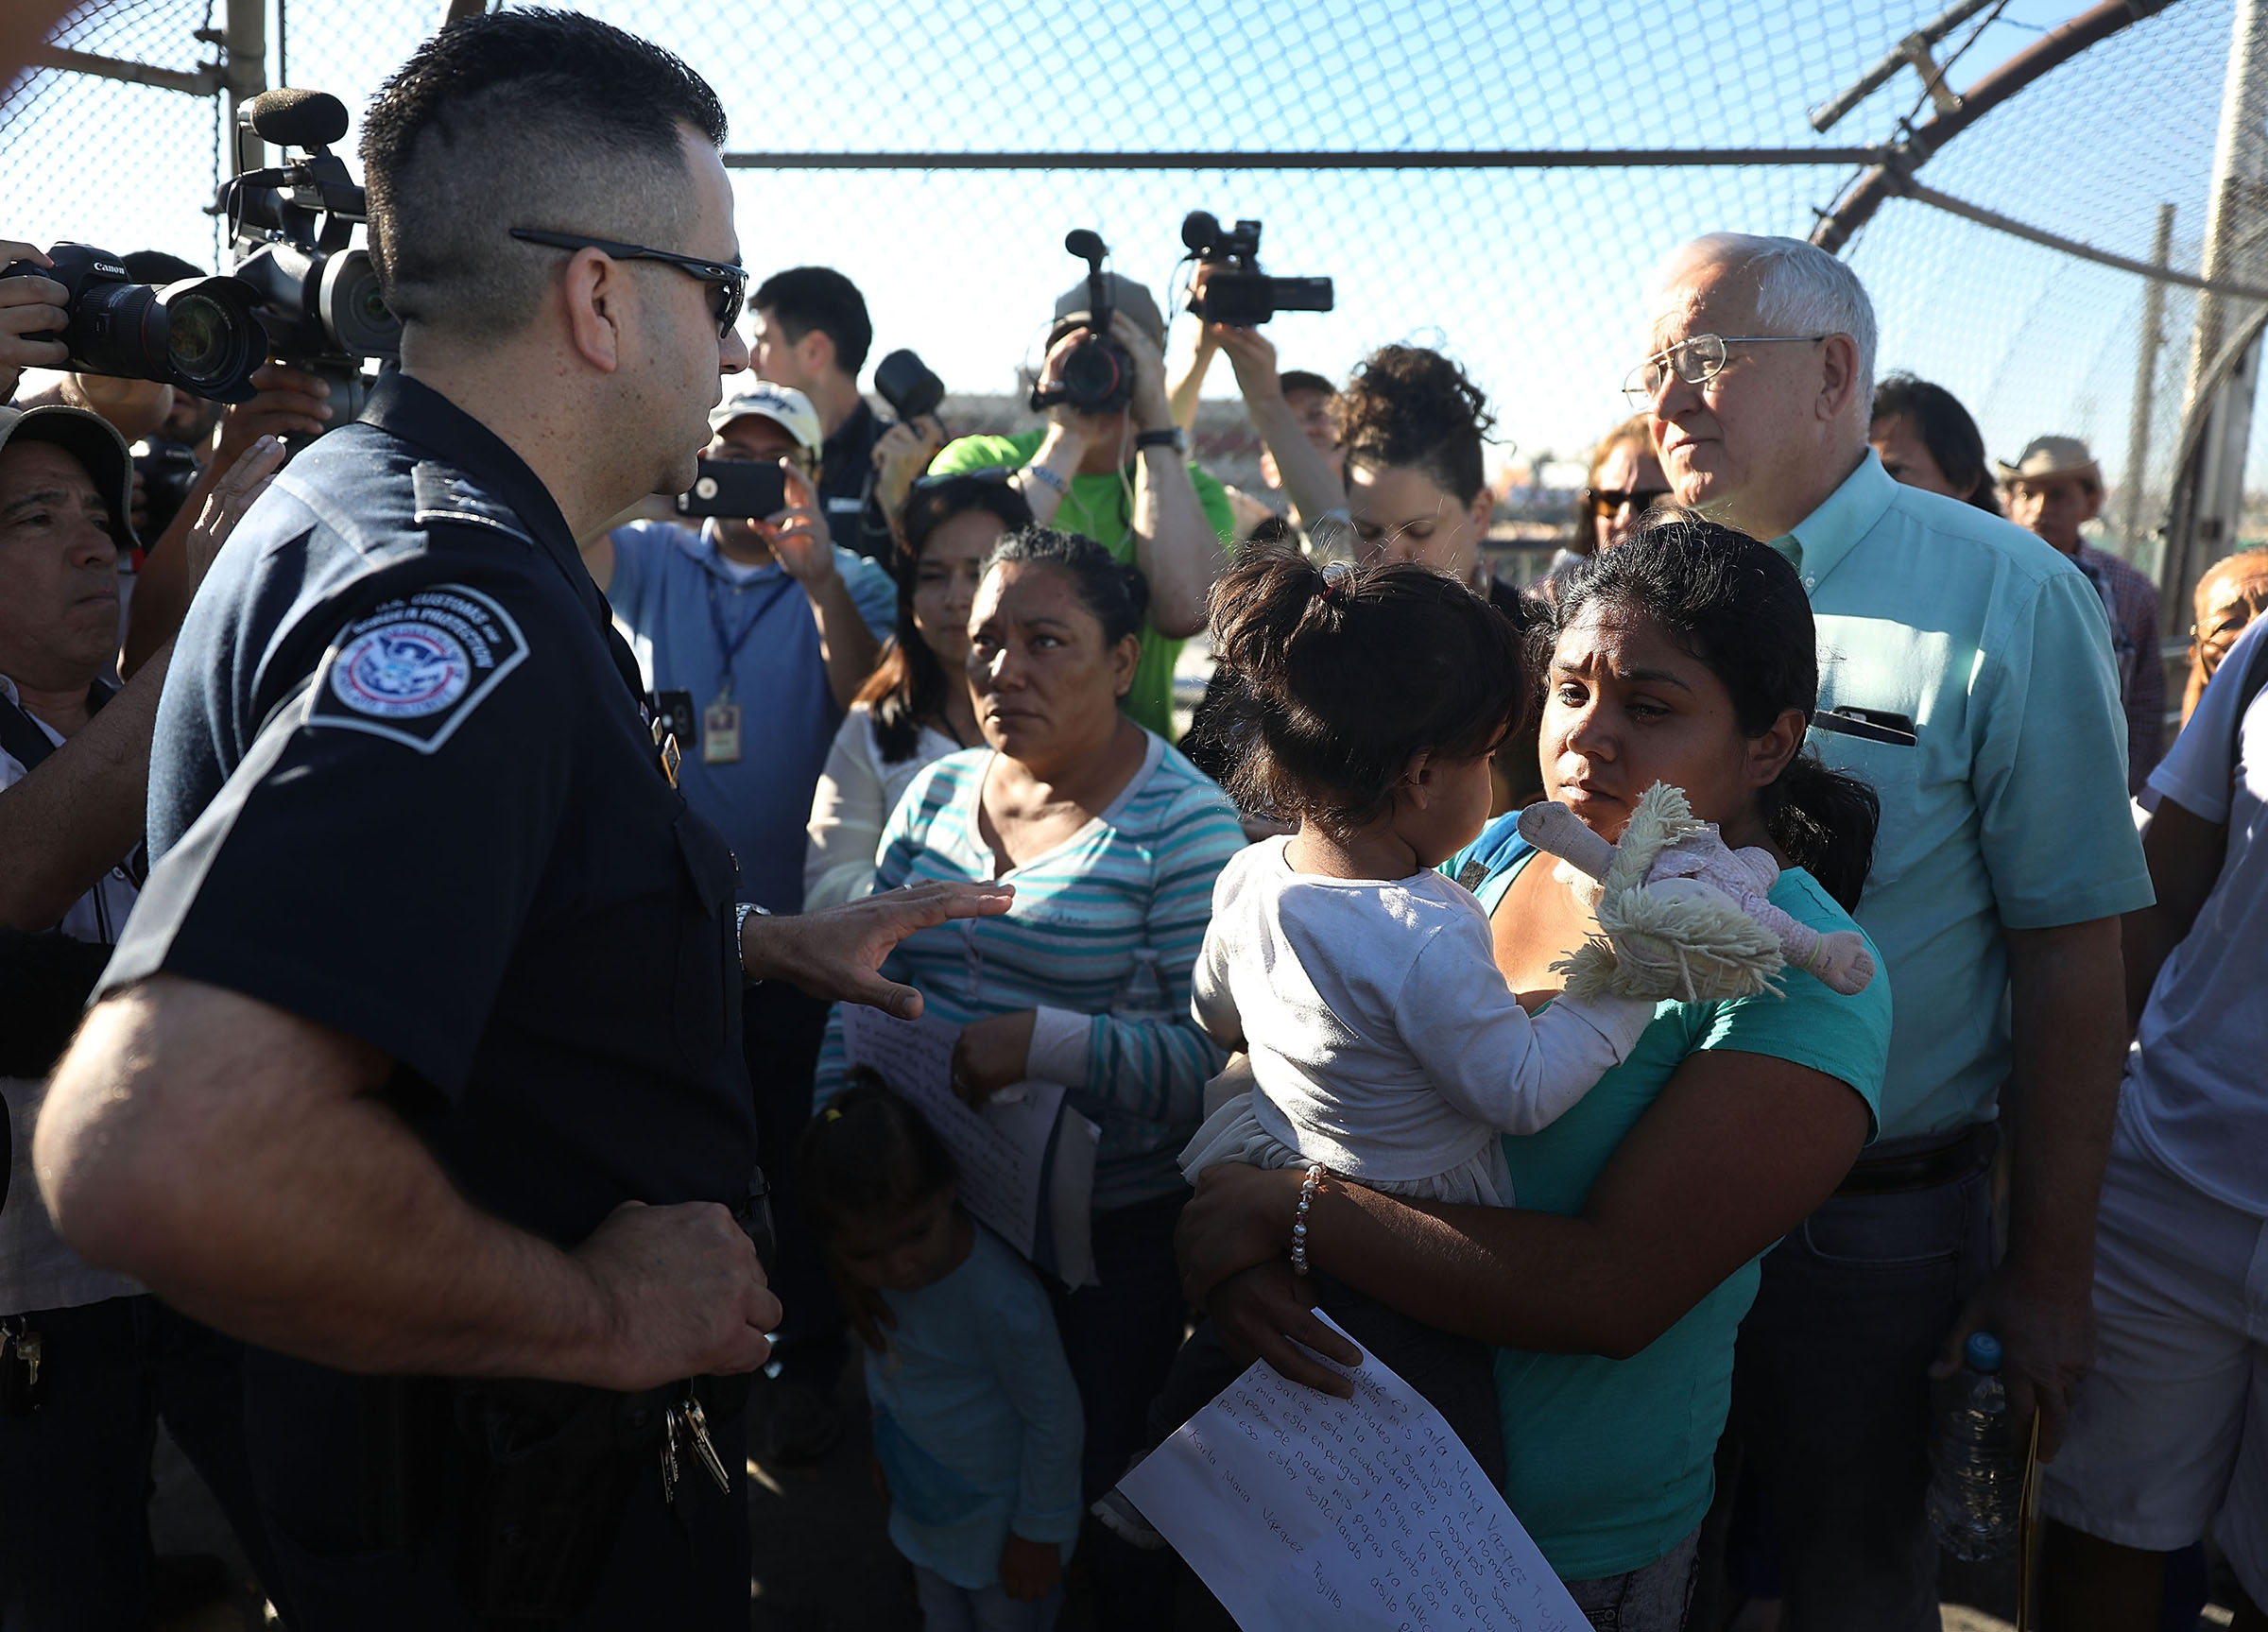 A U.S. Border Patrol agent informs Angelica and Karla (who didn't want their last names used),  that they will have to wait at the top of the Paso Del Norte Port of Entry, where the U.S. and Mexico border meet on June 20, 2018 in El Paso, Texas. (Joe Raedle—Getty Images)